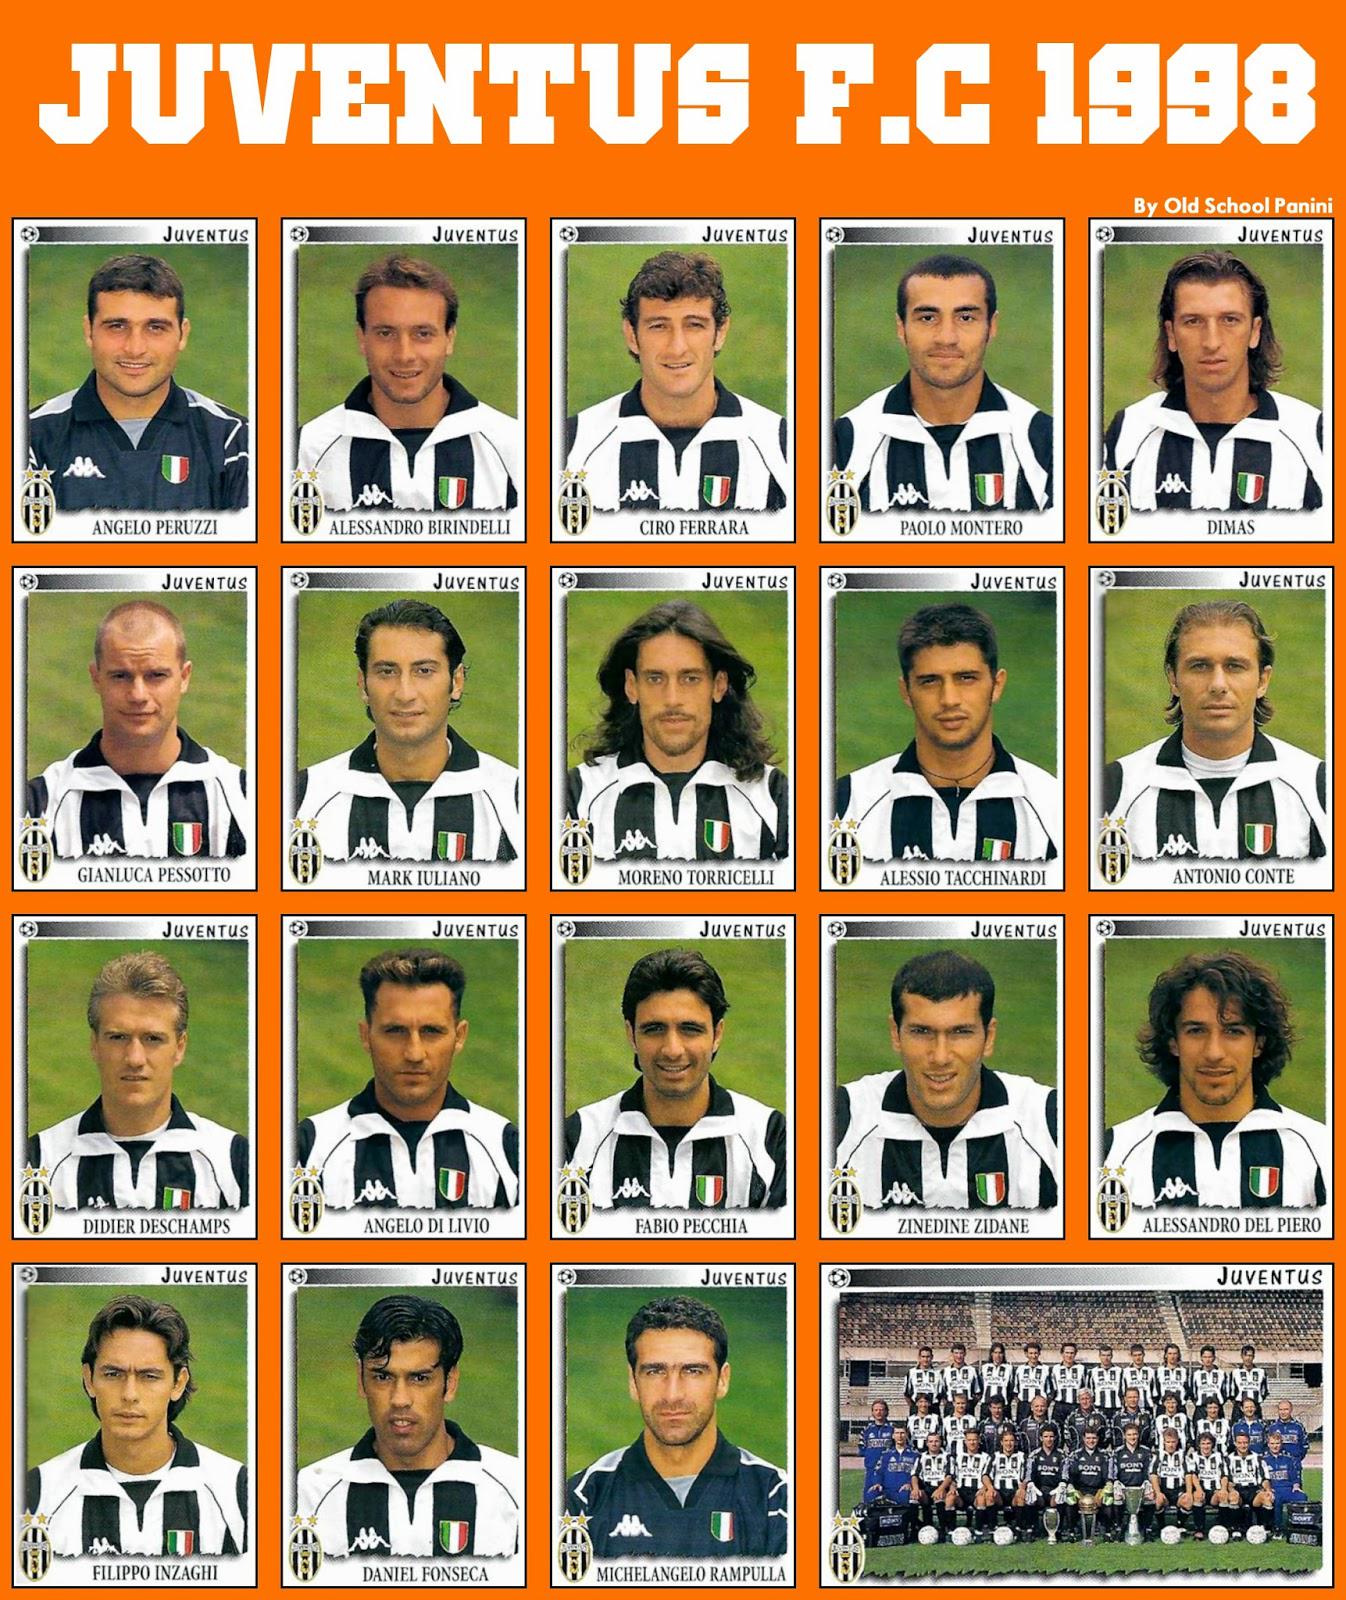 90s Football on Twitter: "Juventus, 1998. What a squad ...